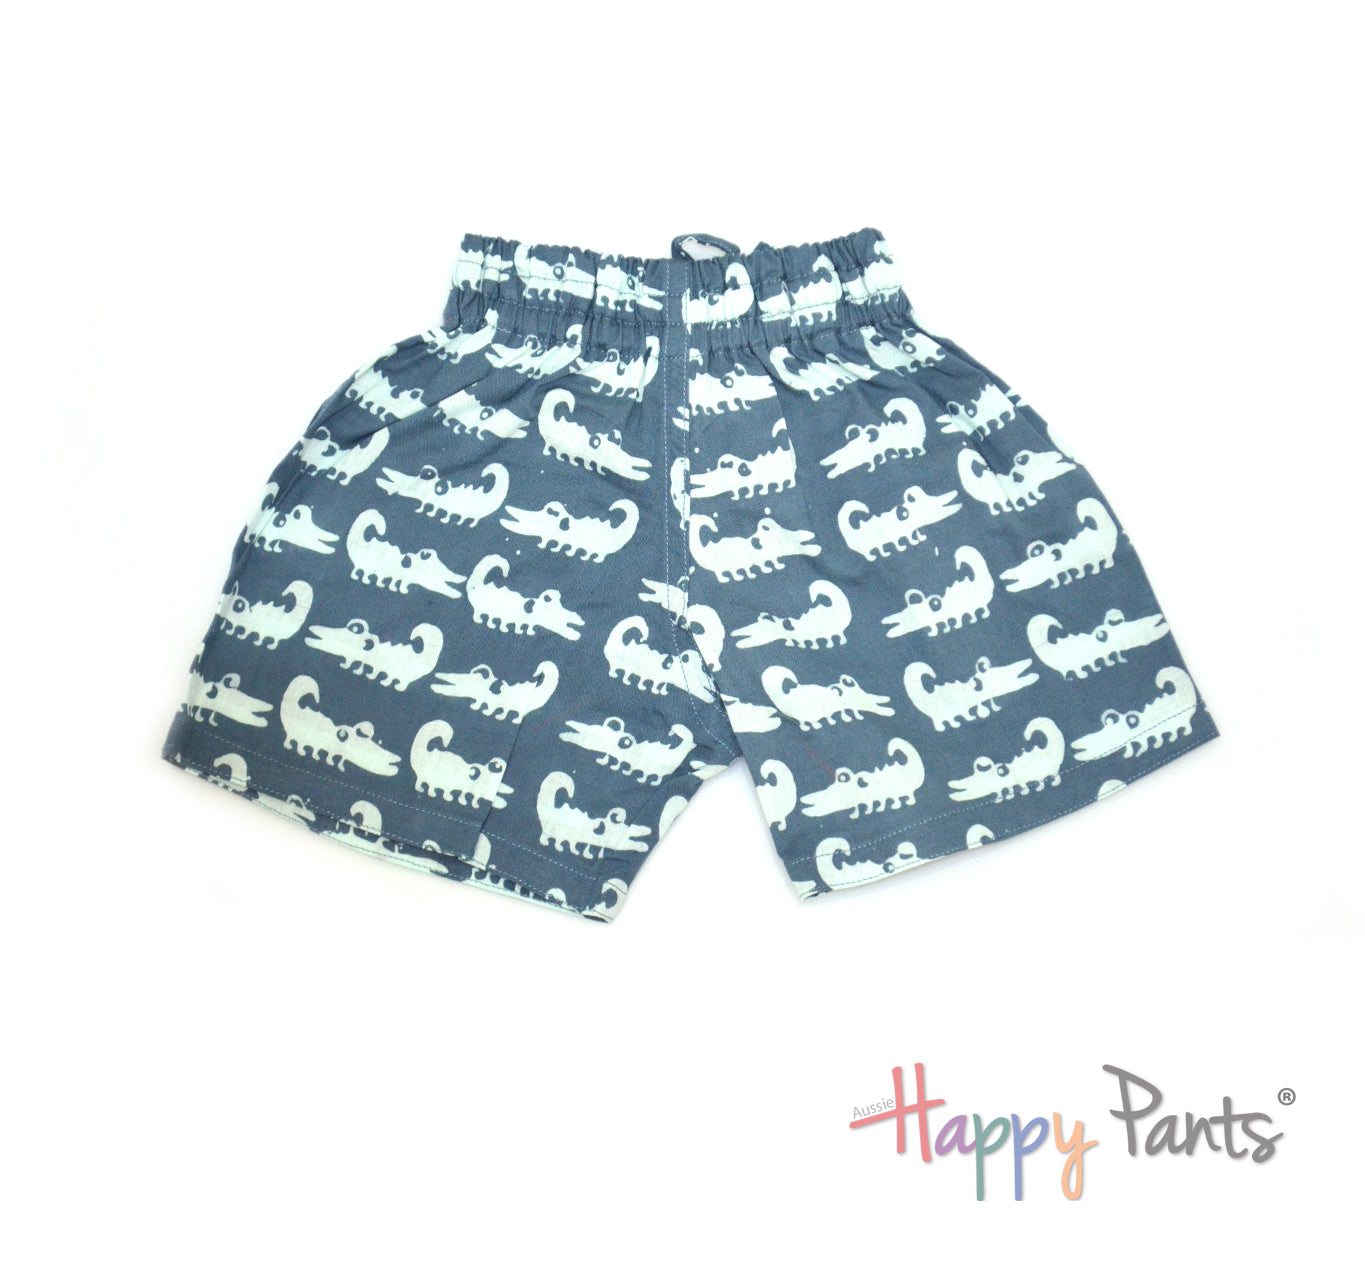 Curious Croc Blue Shorts for Girls